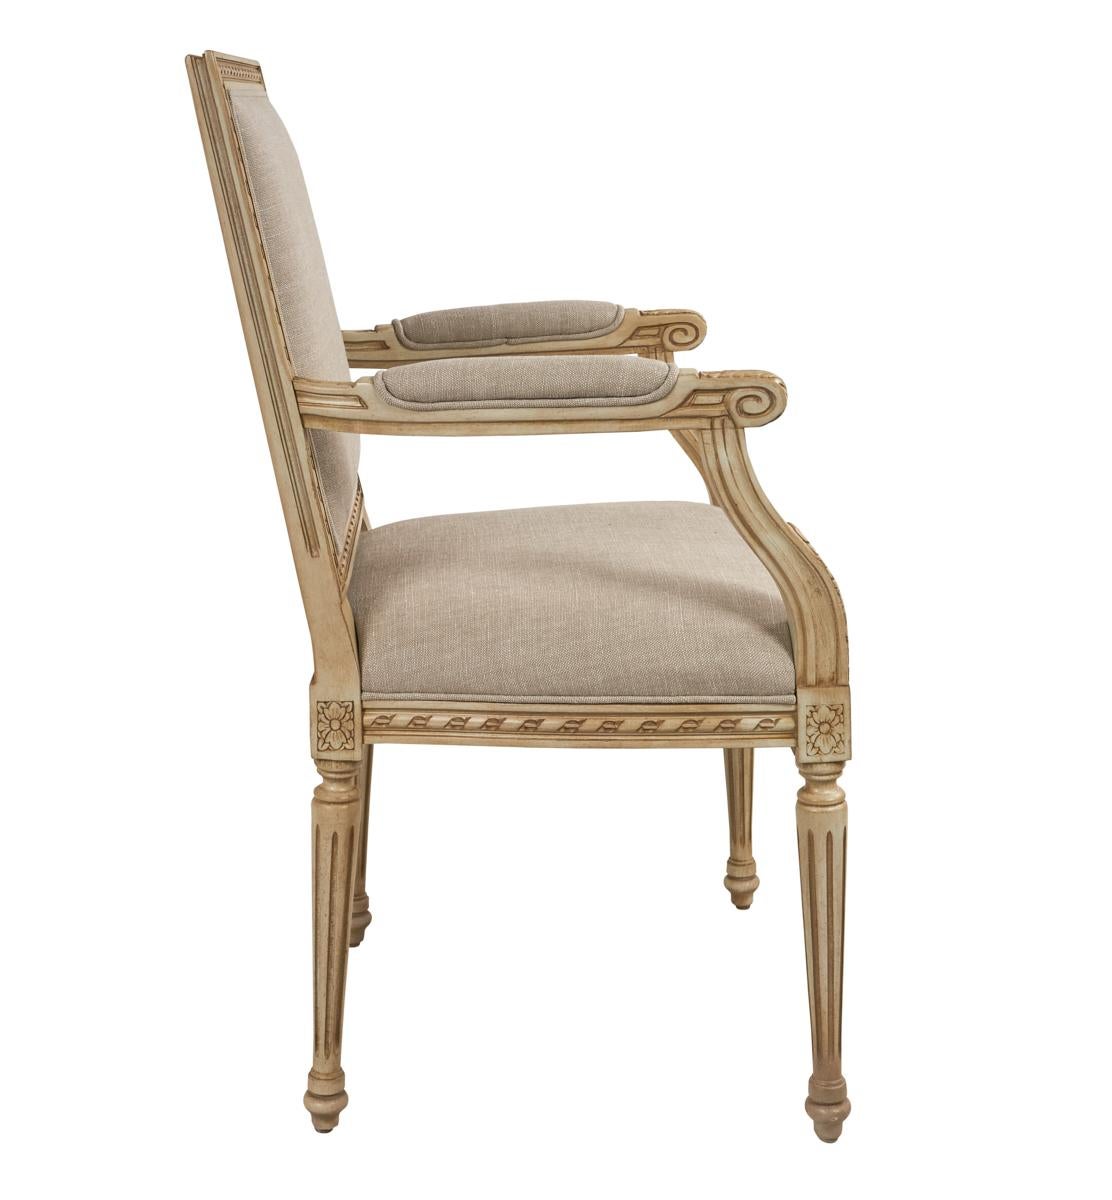 North American Louis XVI Arm Chair in Piet Performance Linen For Sale